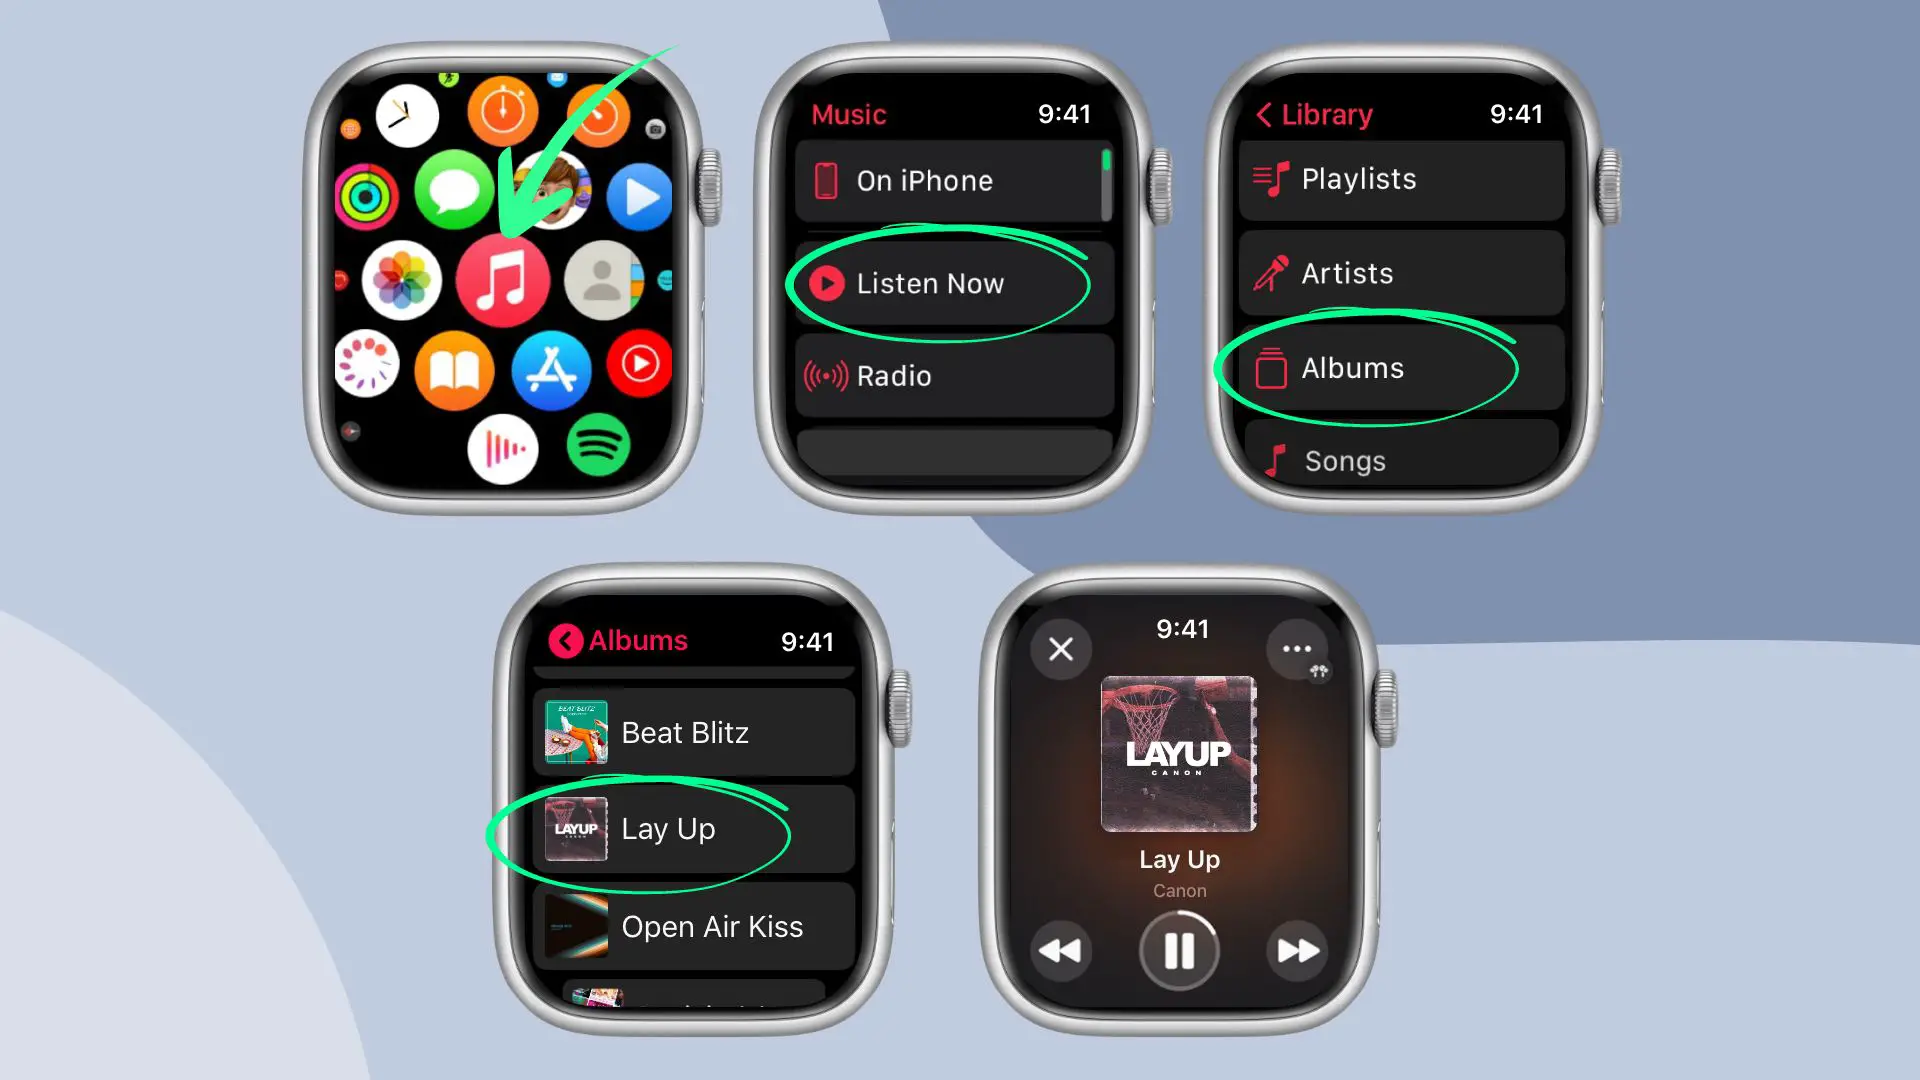 Alternatively, you can play music on the Apple Watch